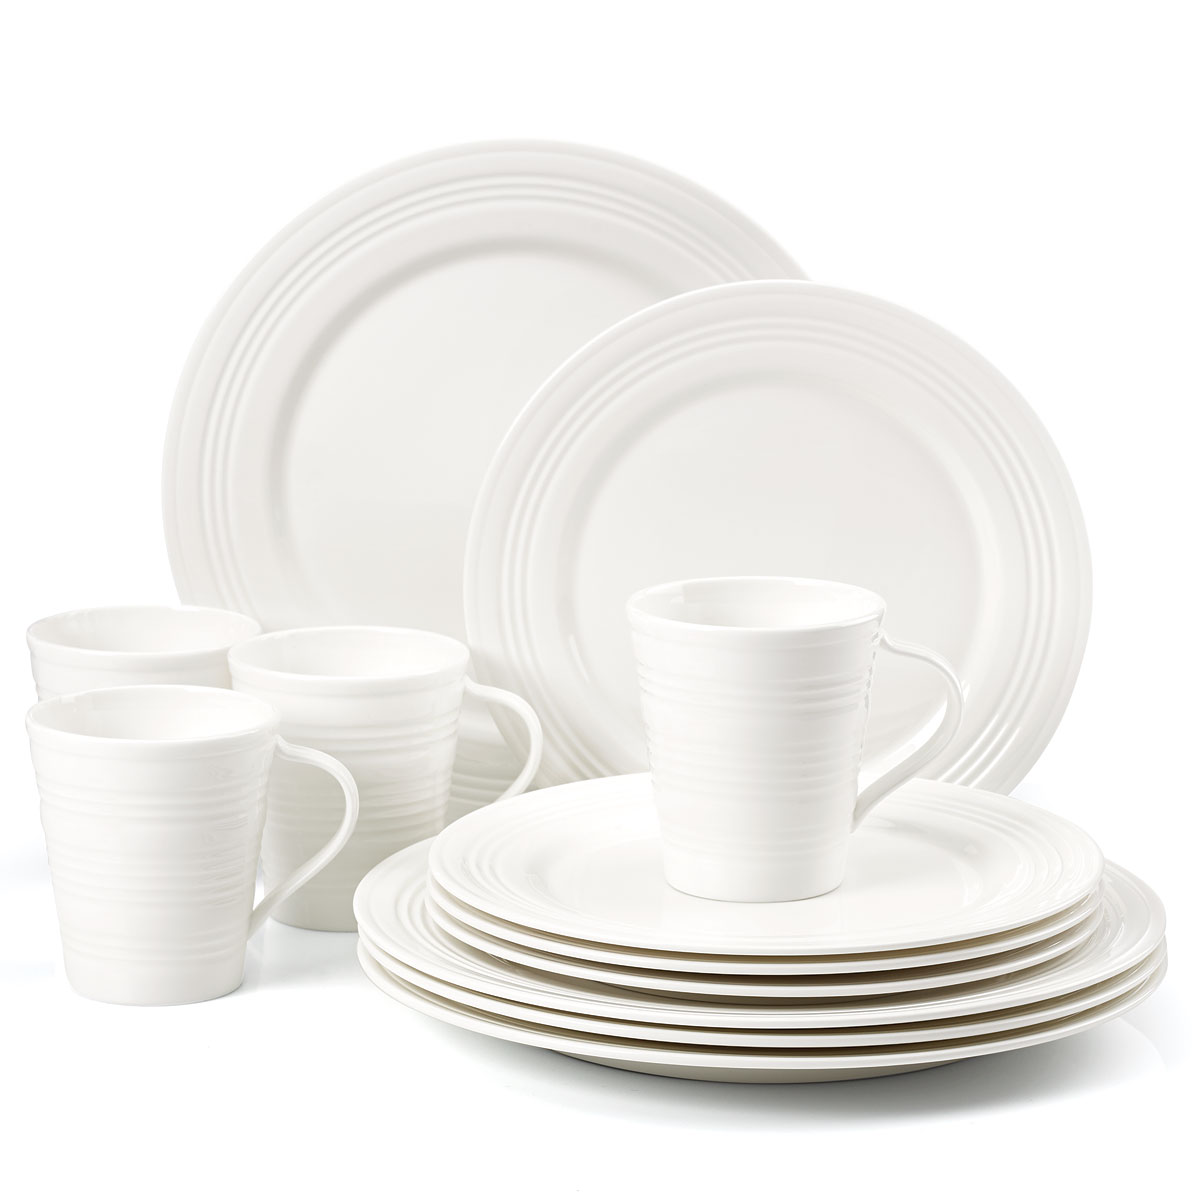 Lenox Tin Can Alley 12 Piece Place Setting - 4 Degree